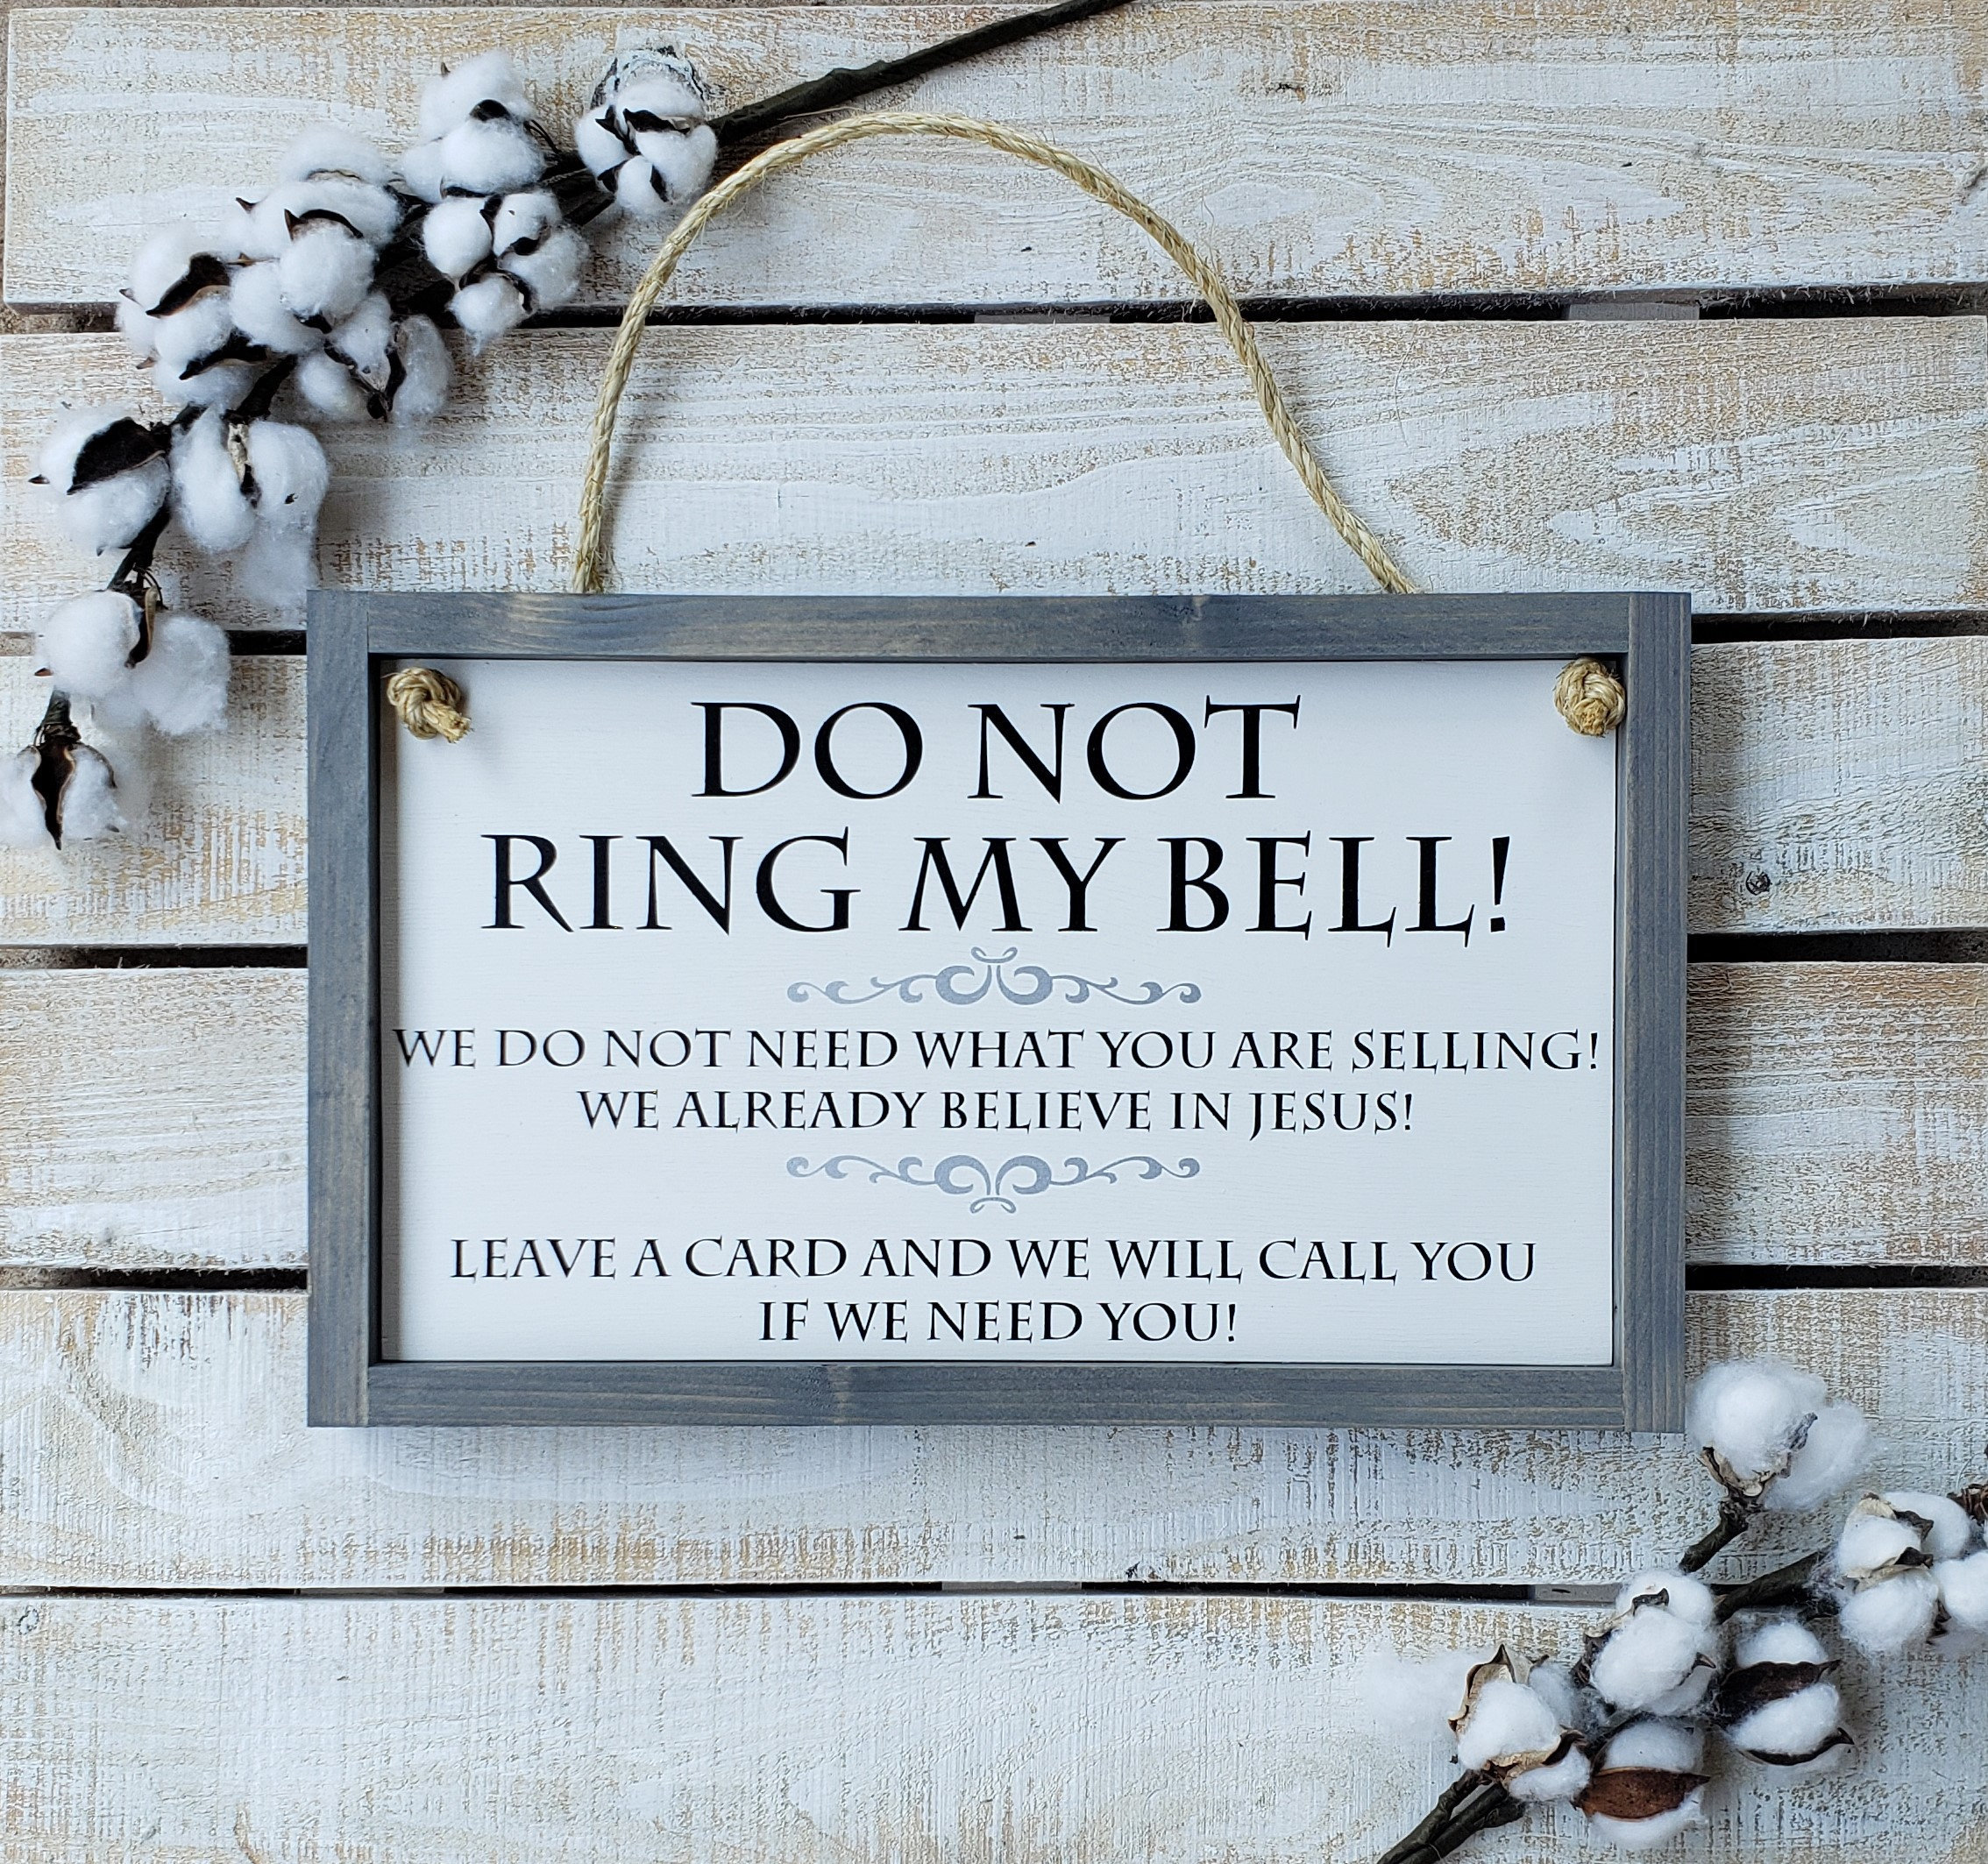 22 hilarious 'don't ring that bell' notes left by very exhausted parents